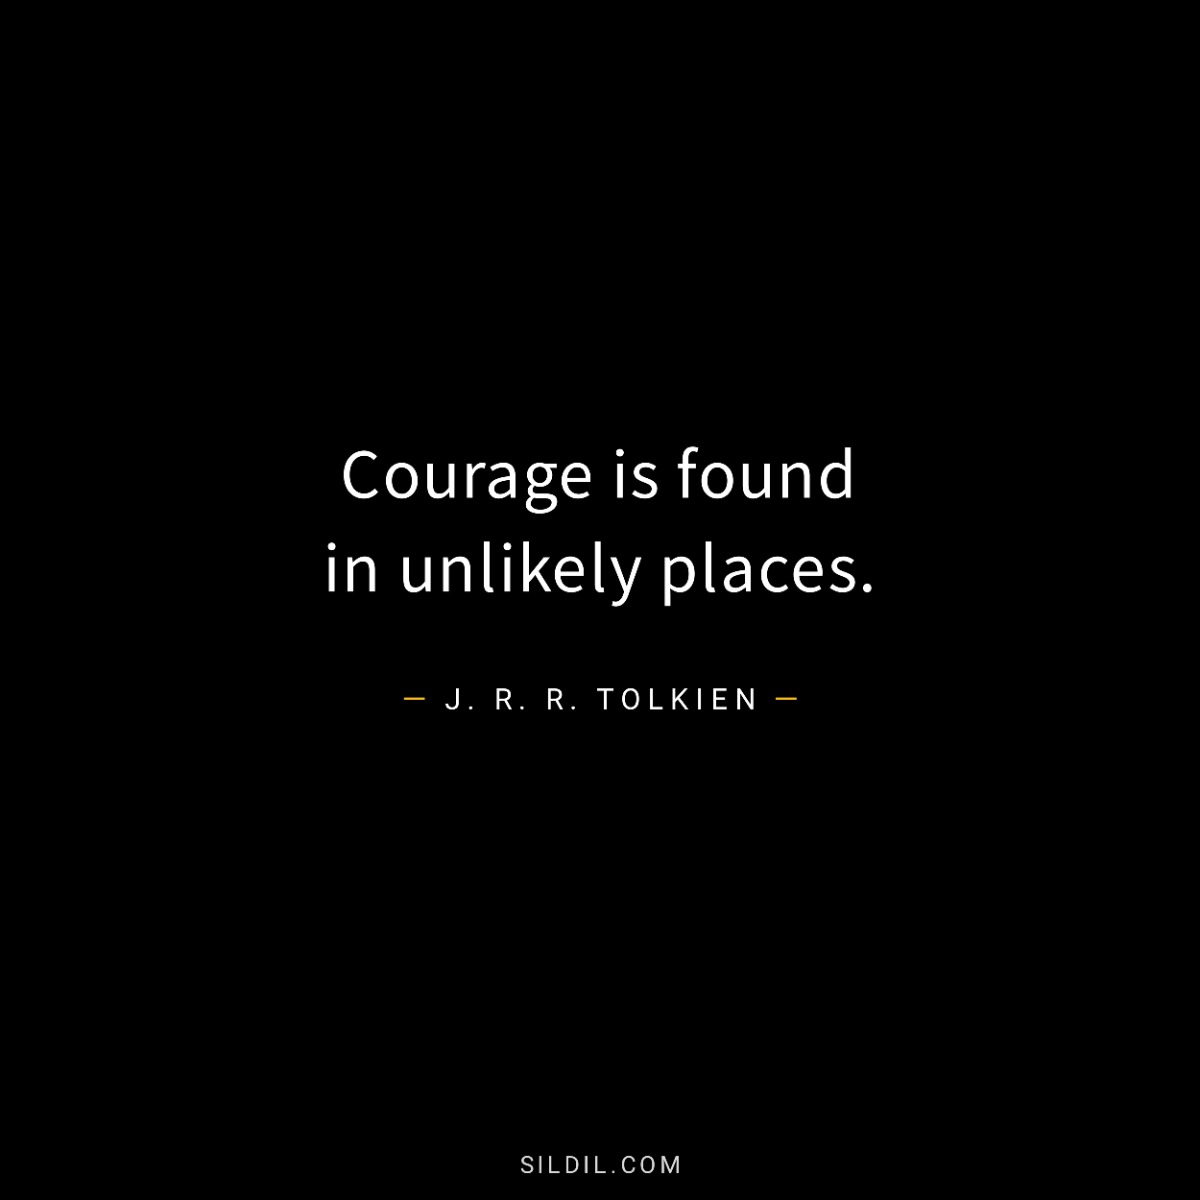 Courage is found in unlikely places.